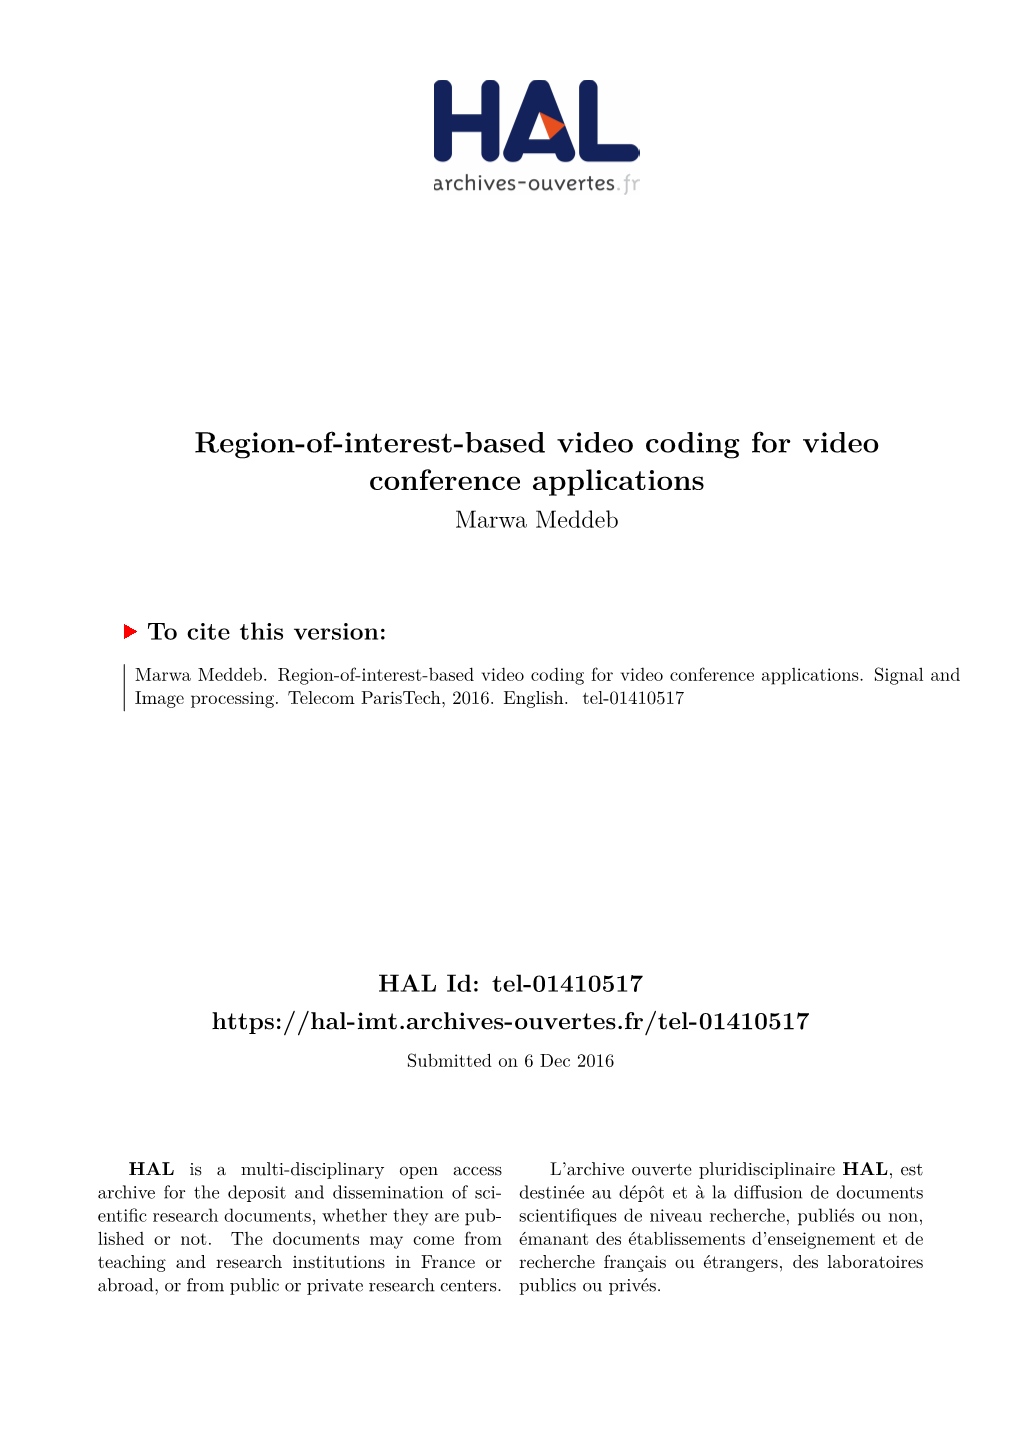 Region-Of-Interest-Based Video Coding for Video Conference Applications Marwa Meddeb